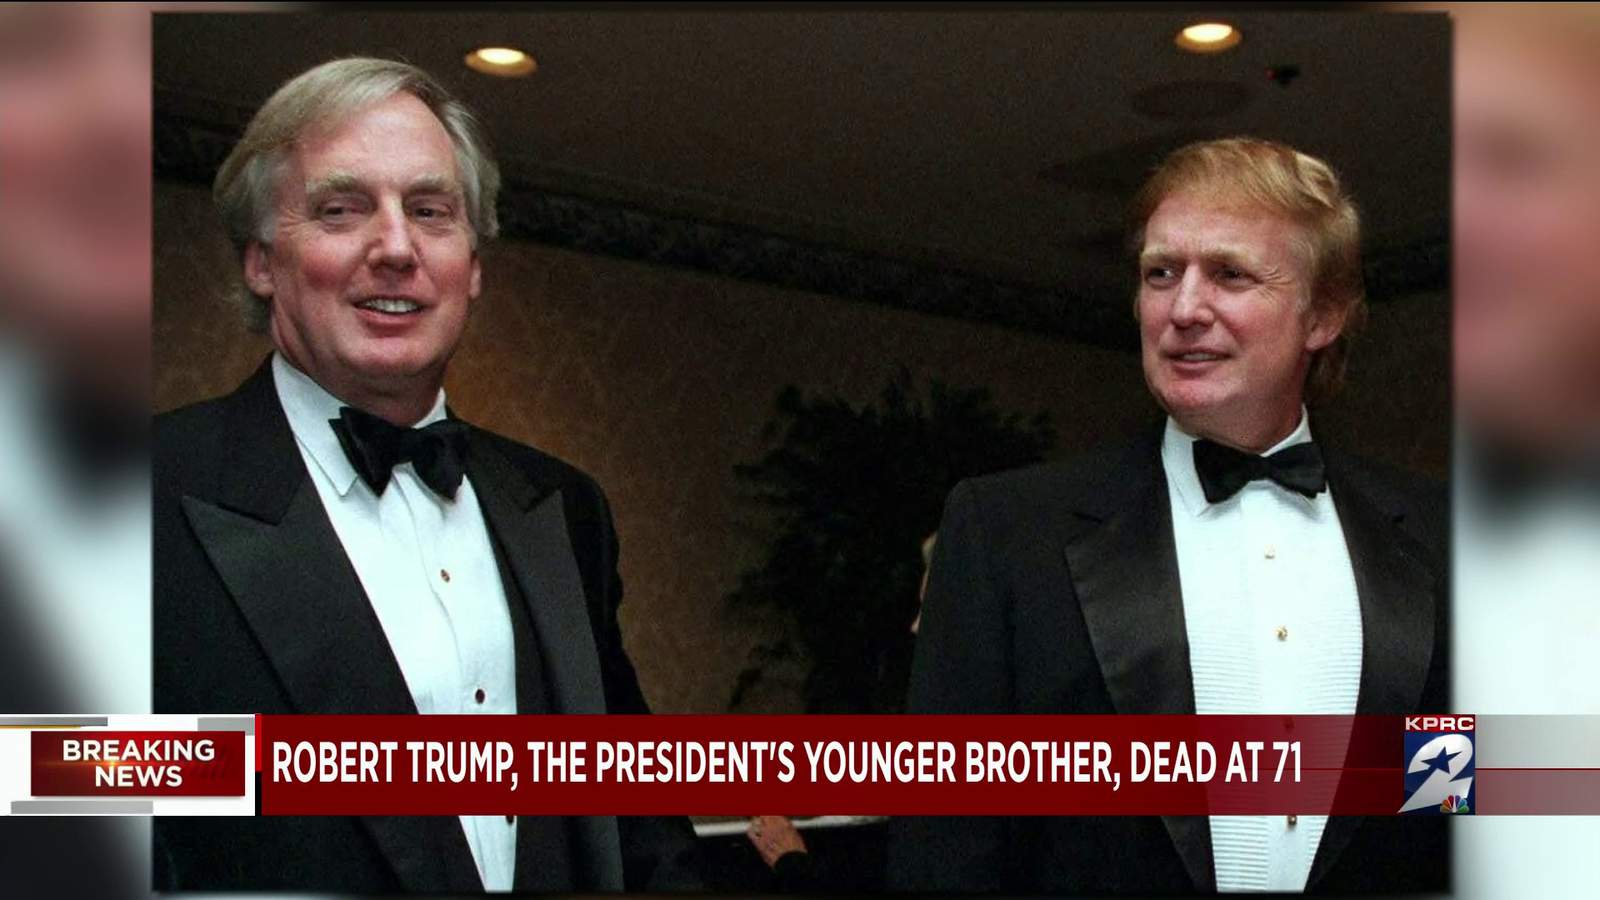 Robert Trump, the presidents younger brother, dead at 71